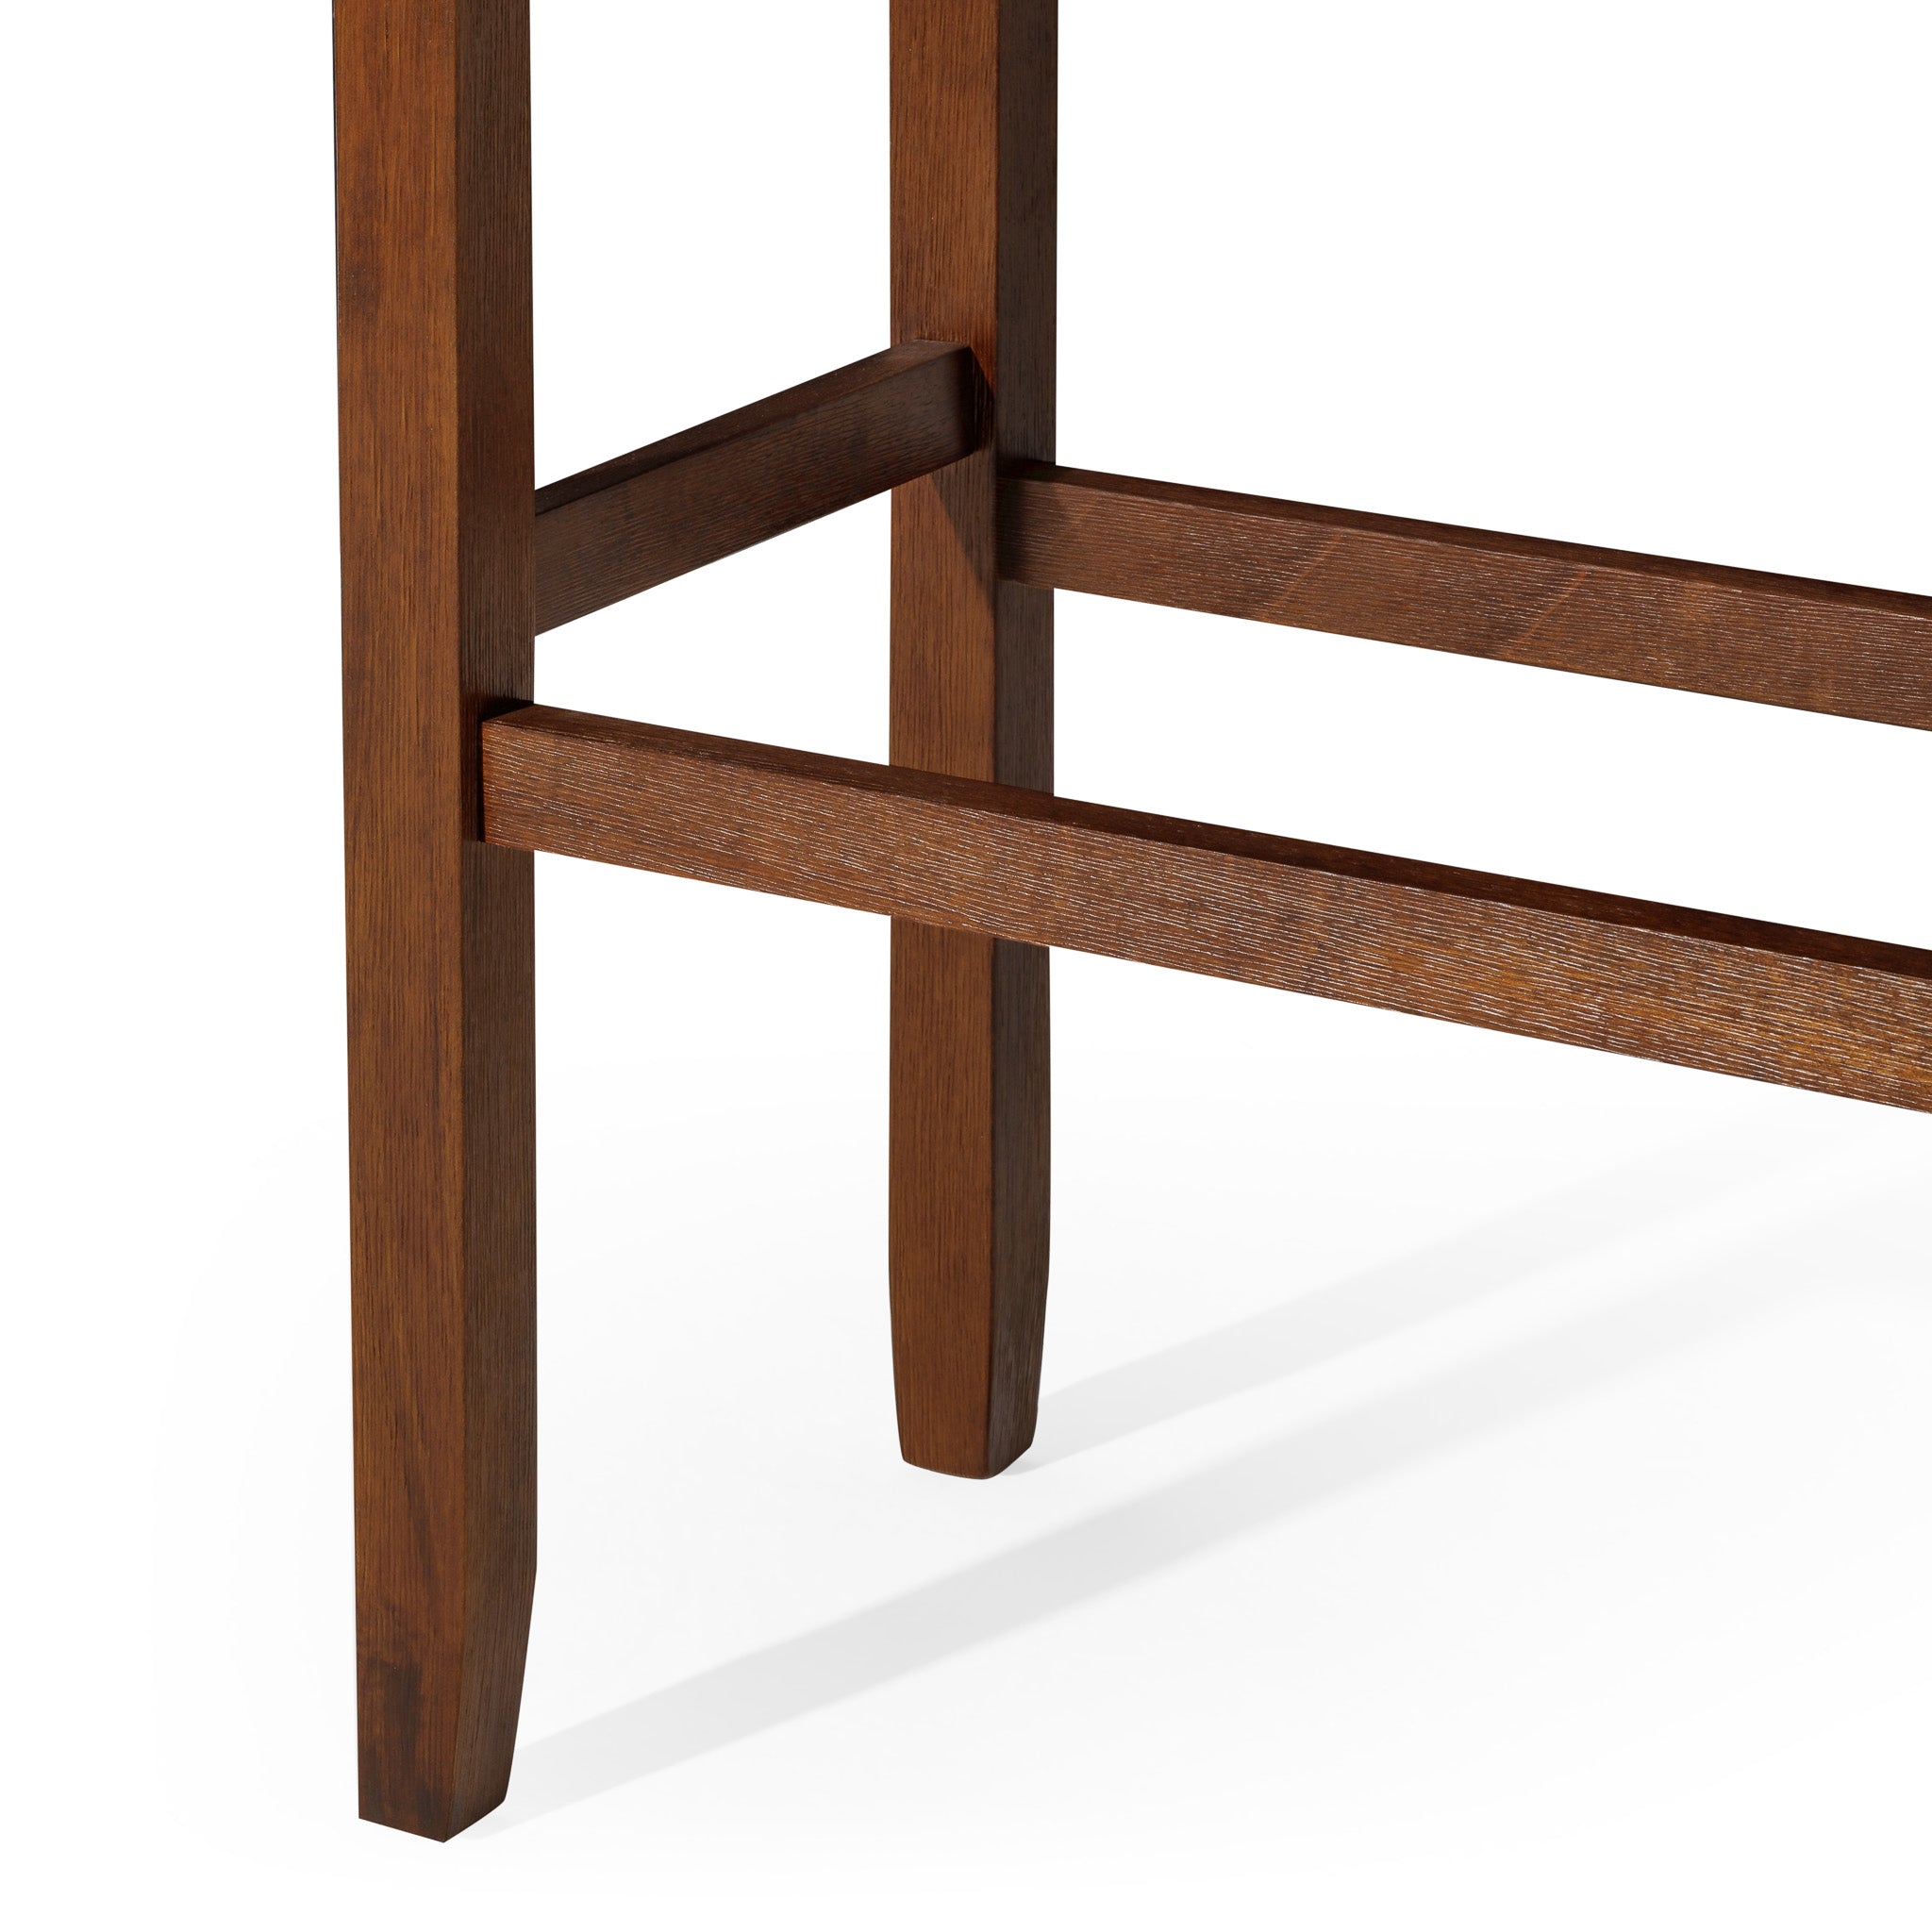 Harper Bar Stool in Walnut Wood Finish with Distressed Brown Vegan Leather, Set of 2 in Stools by Maven Lane